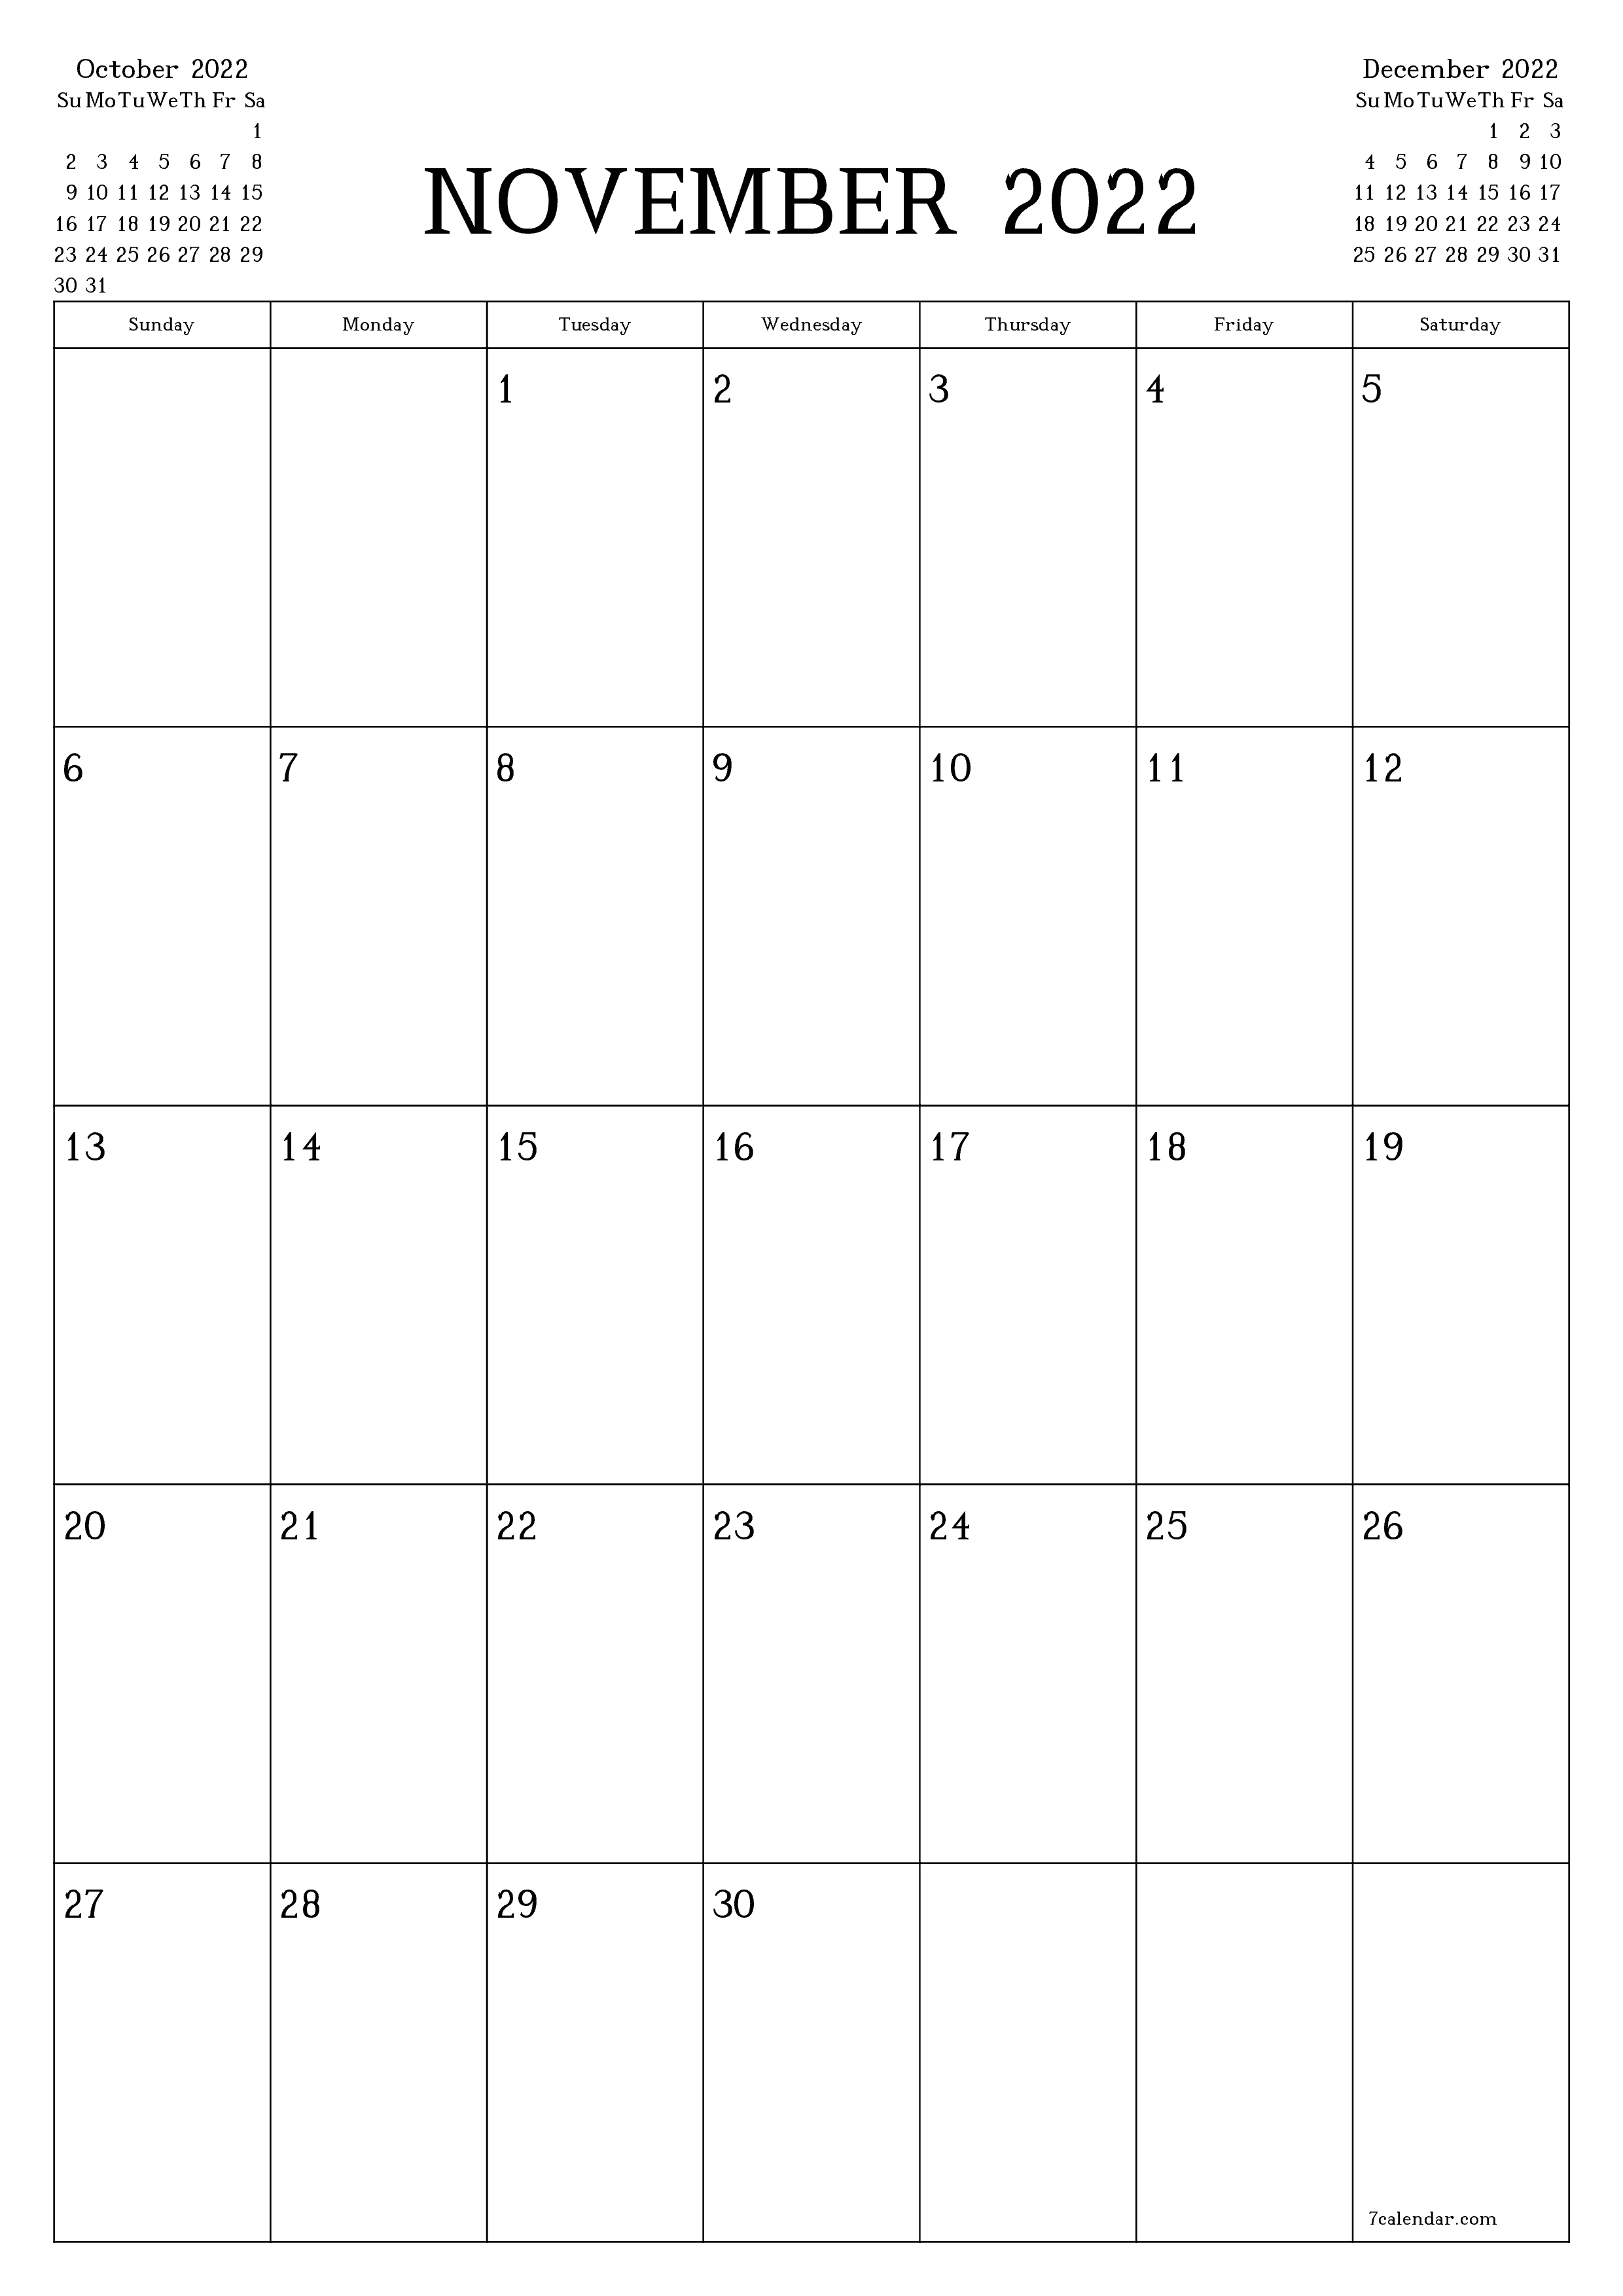 Blank monthly printable calendar and planner for month November 2022 with notes save and print to PDF PNG English - 7calendar.com